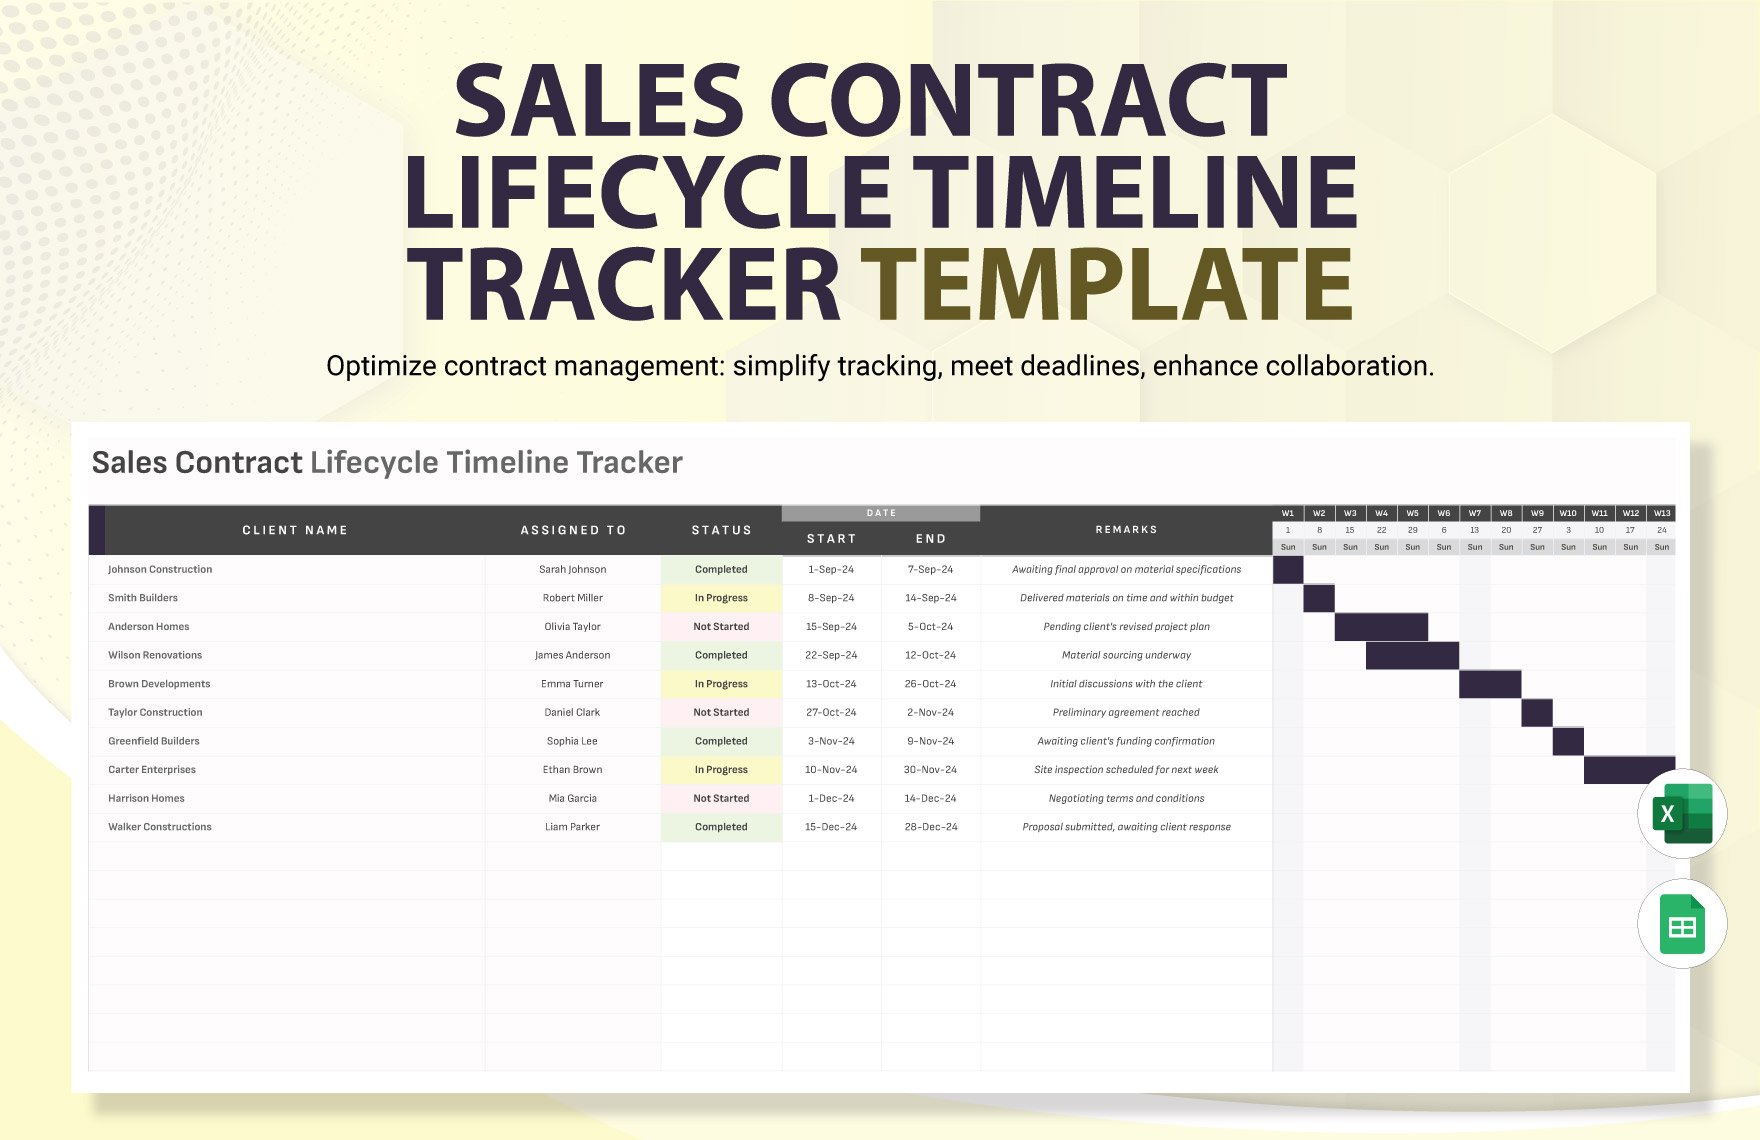 Sales Contract Lifecycle Timeline Tracker Template in Excel, Google Sheets